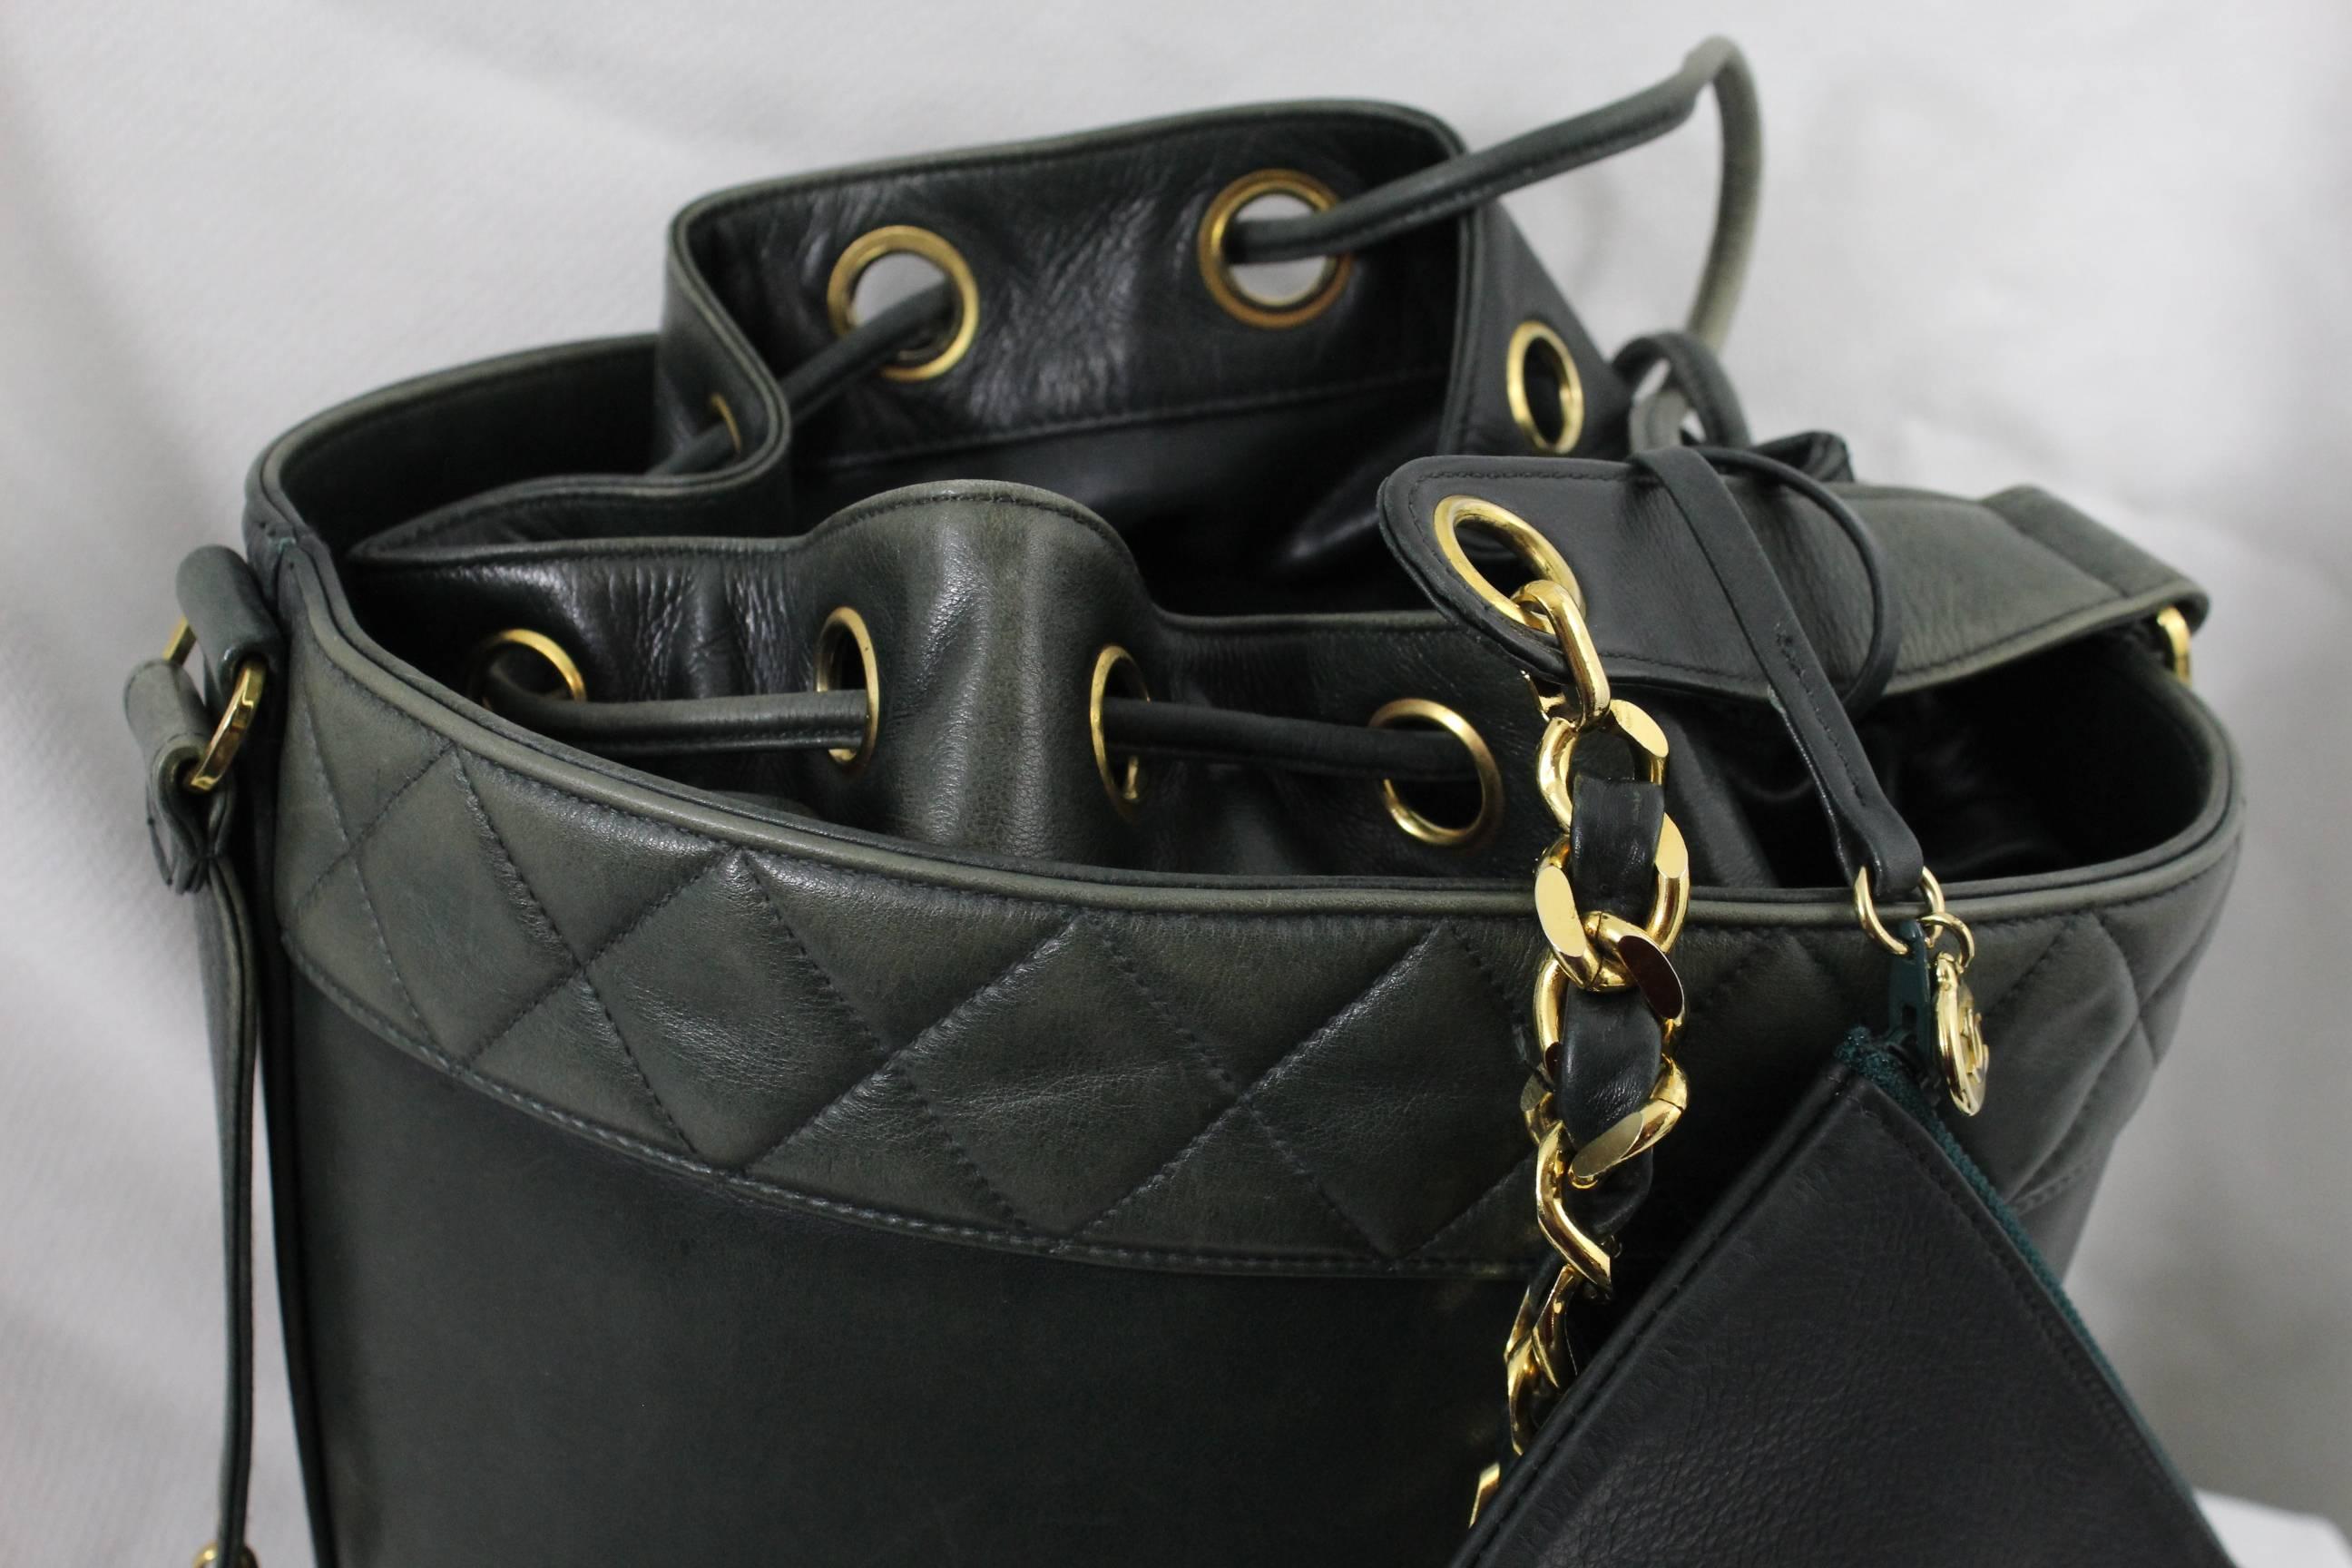 Chanel Vintage Bucket Bag in green leather with pouch.

Good condition, some loss of the color in the leather but the bag has not been cleaned or brought to a good handgraft.

hardware in really good condition

Size 22cm x 22